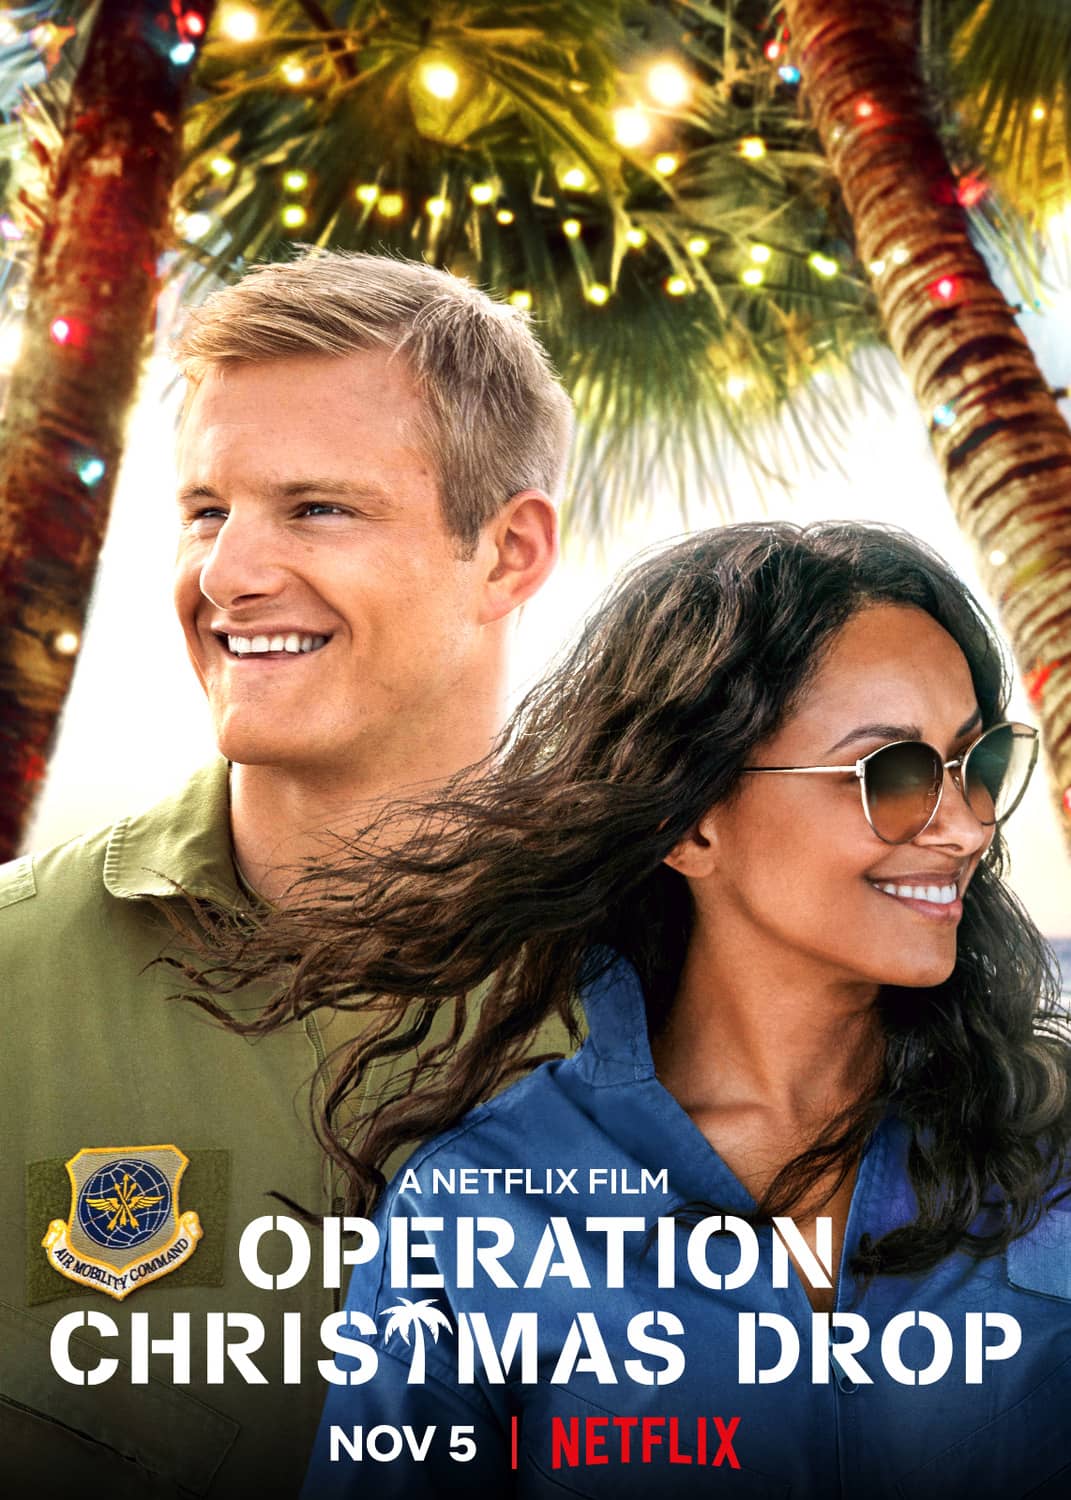 Congressional aide Erica Miller lands at a beachside Air Force base, where she clashes with Capt. Andrew Jantz over his pet project -- Operation: Christmas Drop.